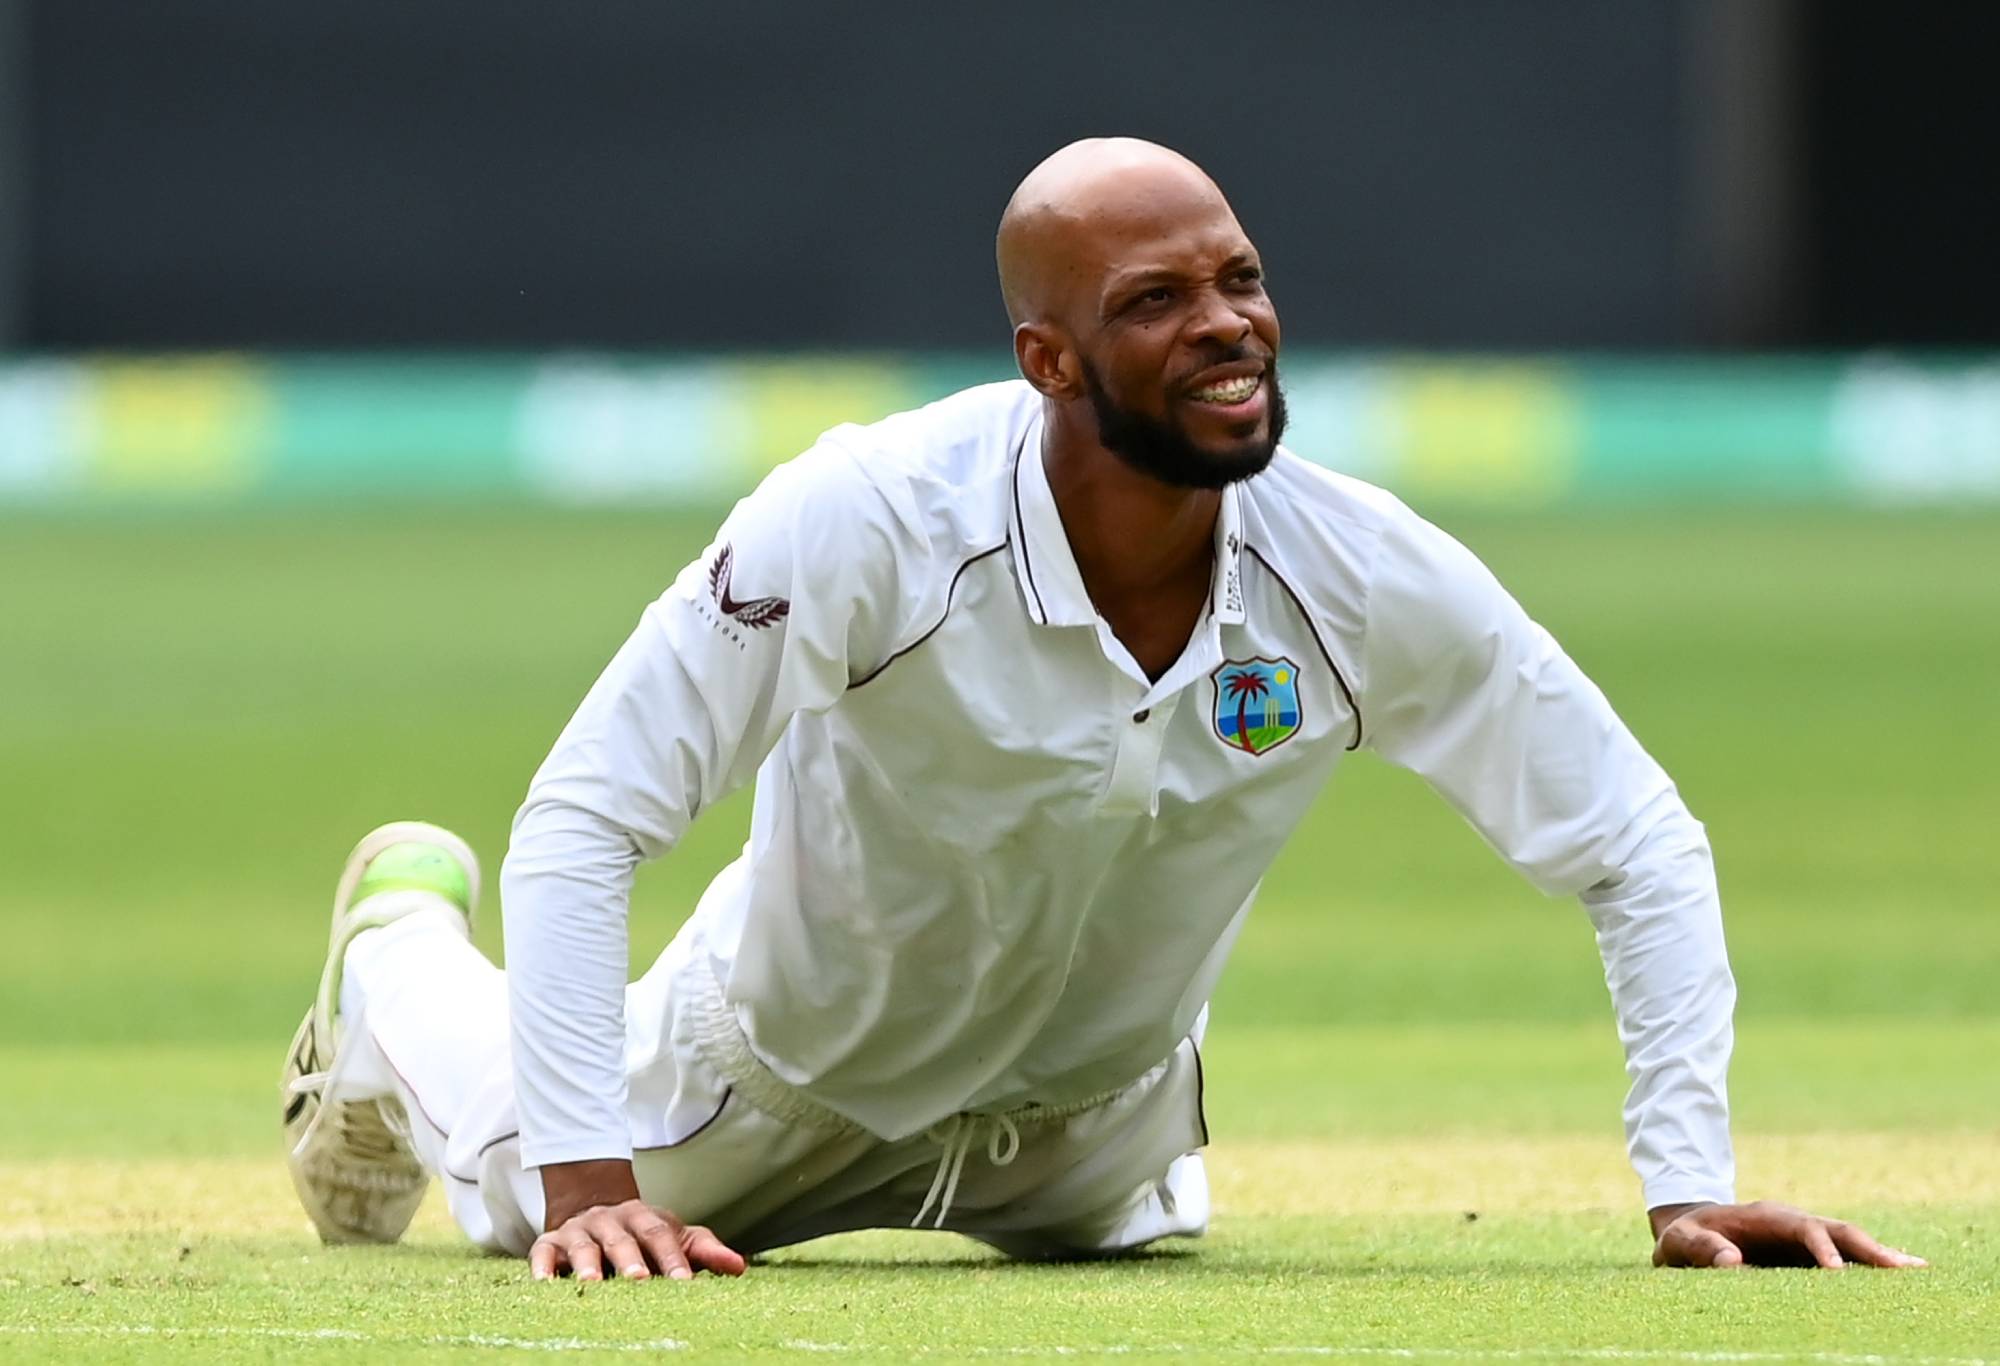 PERTH, AUSTRALIA - DECEMBER 01: Roston Chase of the West Indies gets up from diving for a ball during day two of the First Test match between Australia and the West Indies at Optus Stadium on December 01, 2022 in Perth, Australia. (Photo by Quinn Rooney - CA/Cricket Australia via Getty Images)